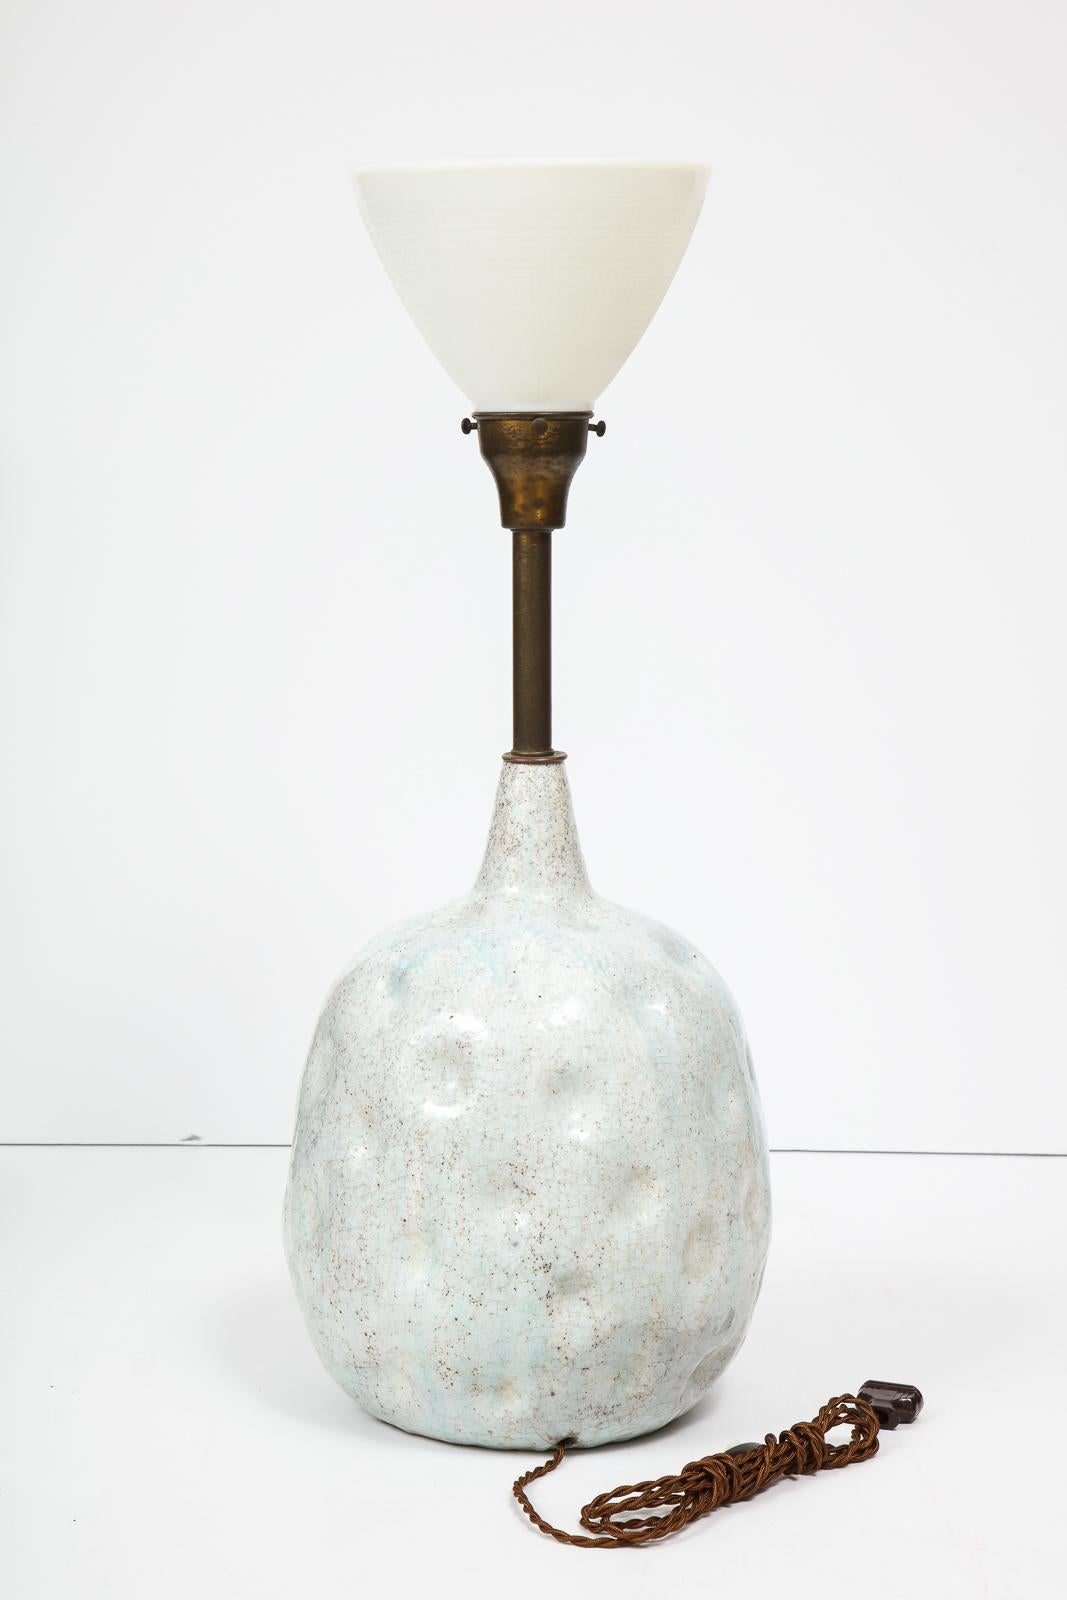 Large, dimpled stoneware lamp with a robin's egg drip glaze and ovoid shape. By Italian master Marcello Fantoni, produced in Italy, circa 1950s. Overall height to the top of the glass is 27.5